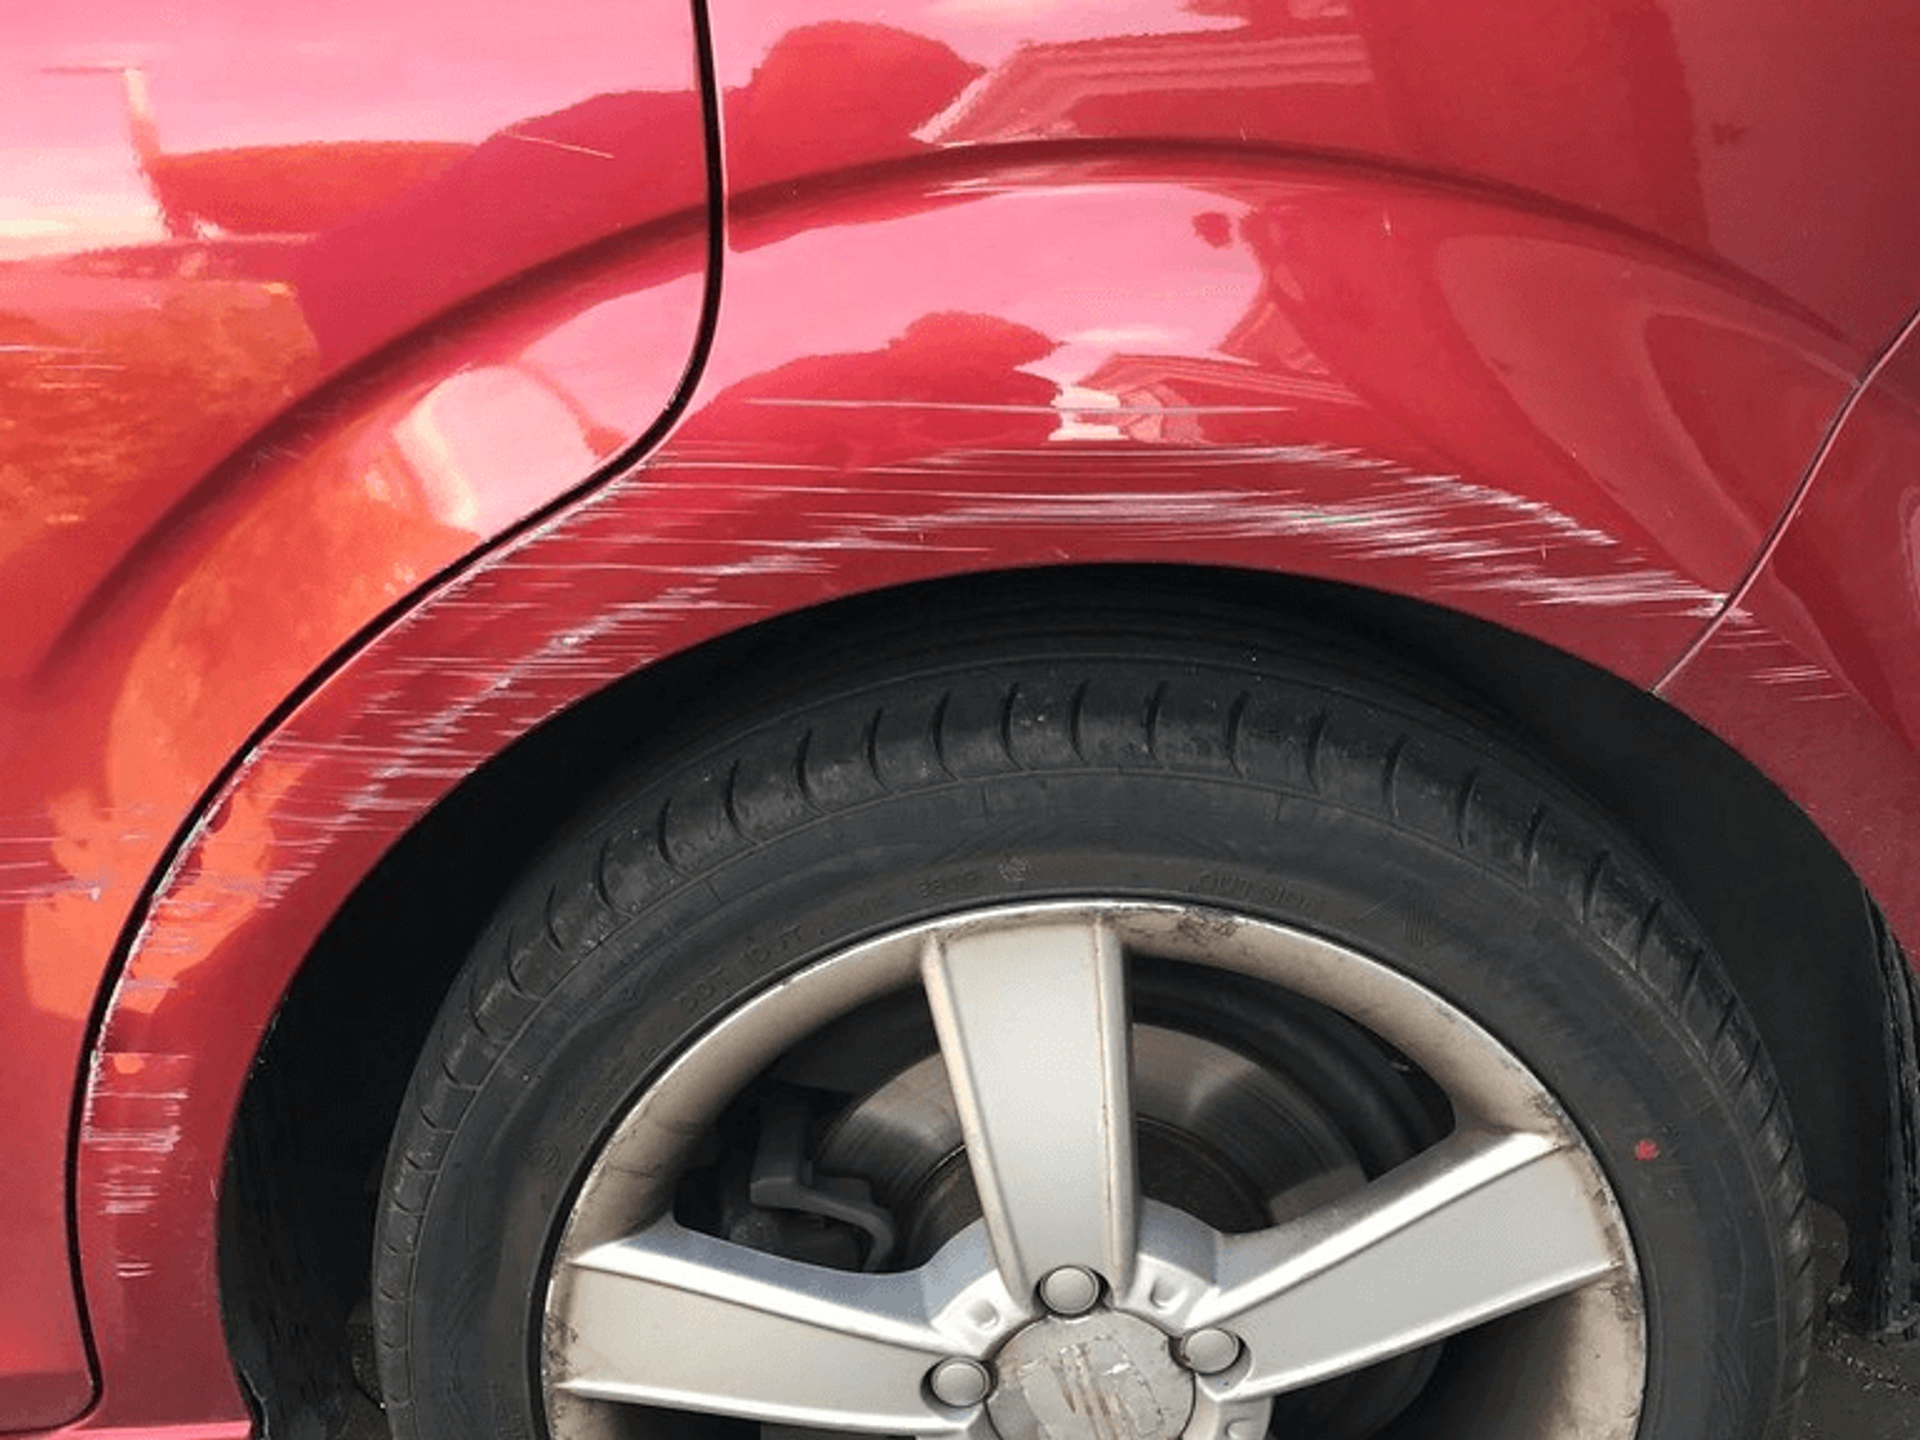 Scratches of red car side 